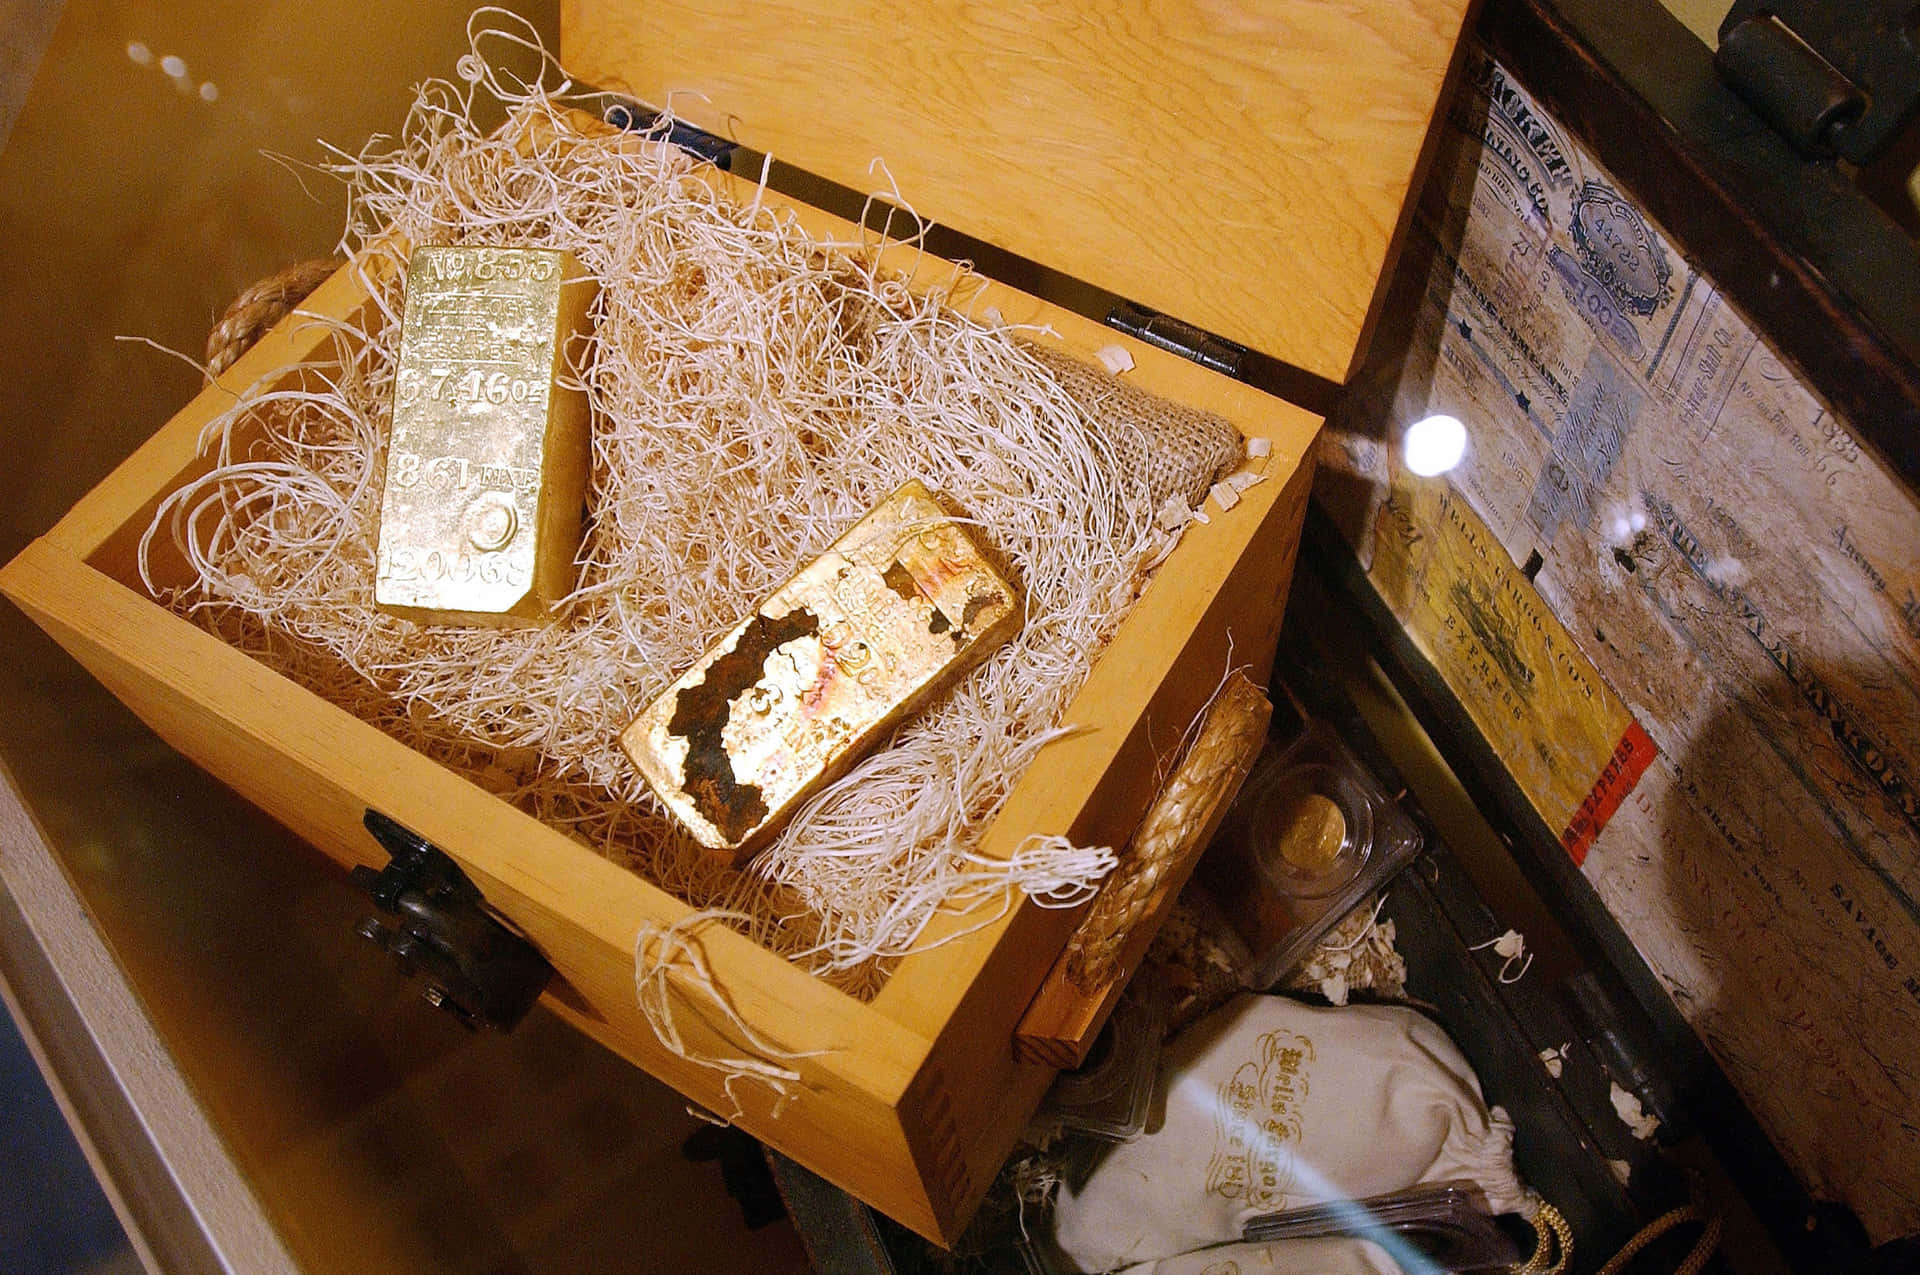 A Wooden Box With Gold Bars